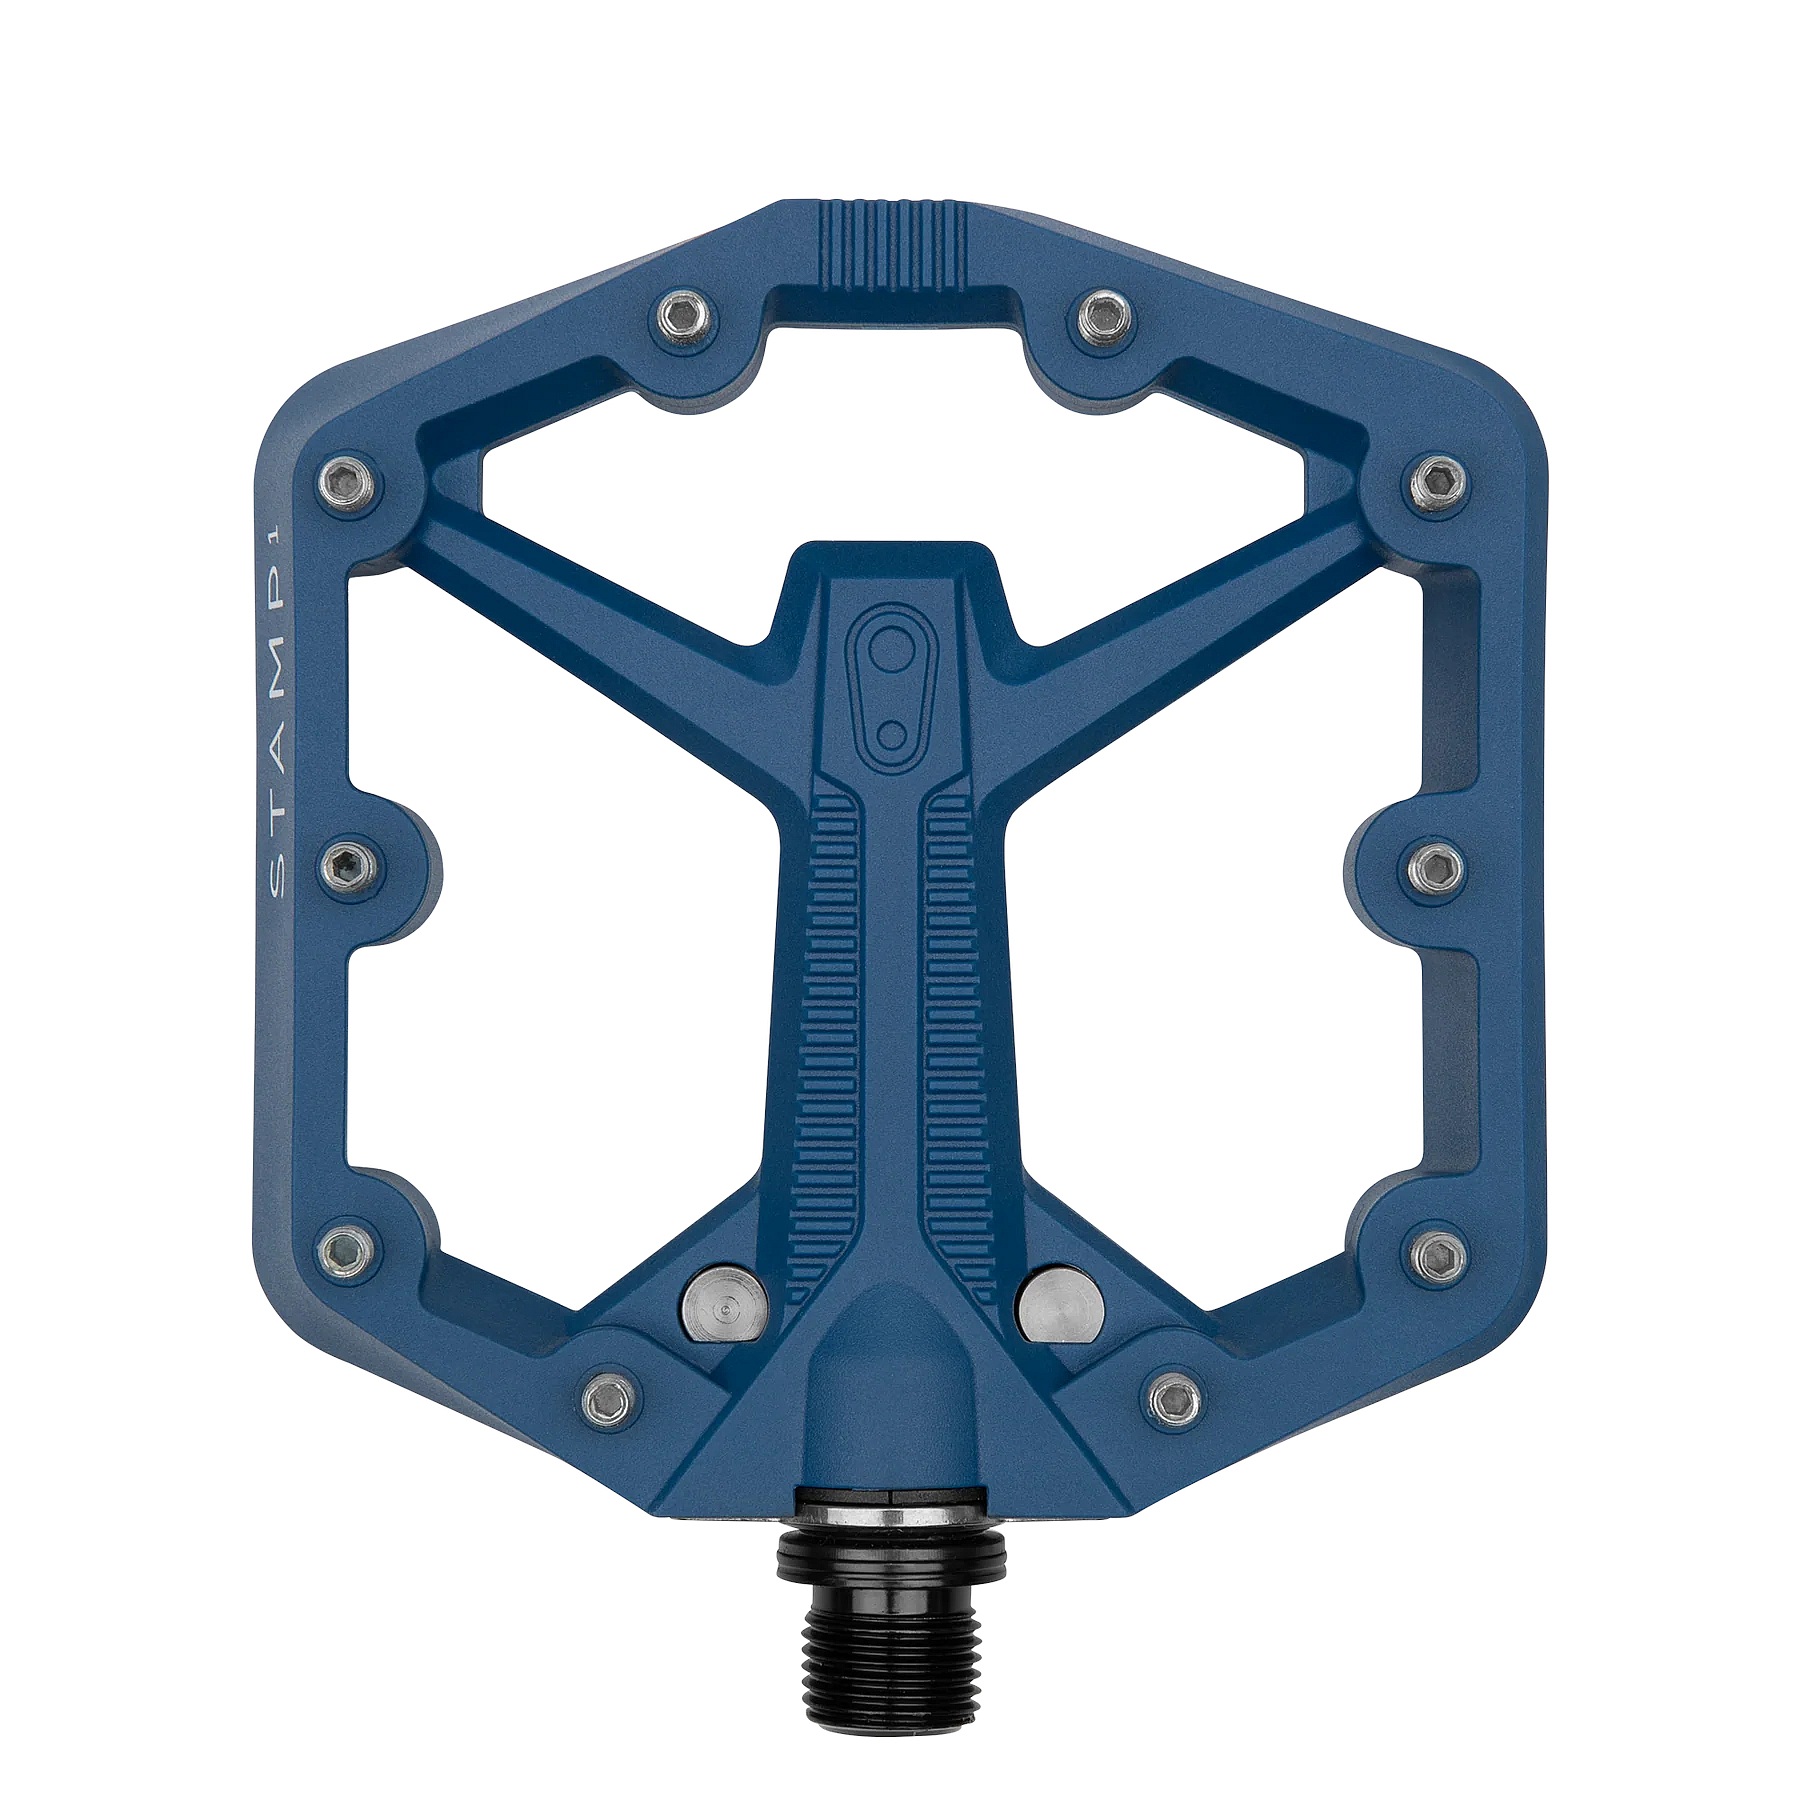 Picture of Crankbrothers Stamp 1 Gen.2 Small - Flat Pedal - navy blue